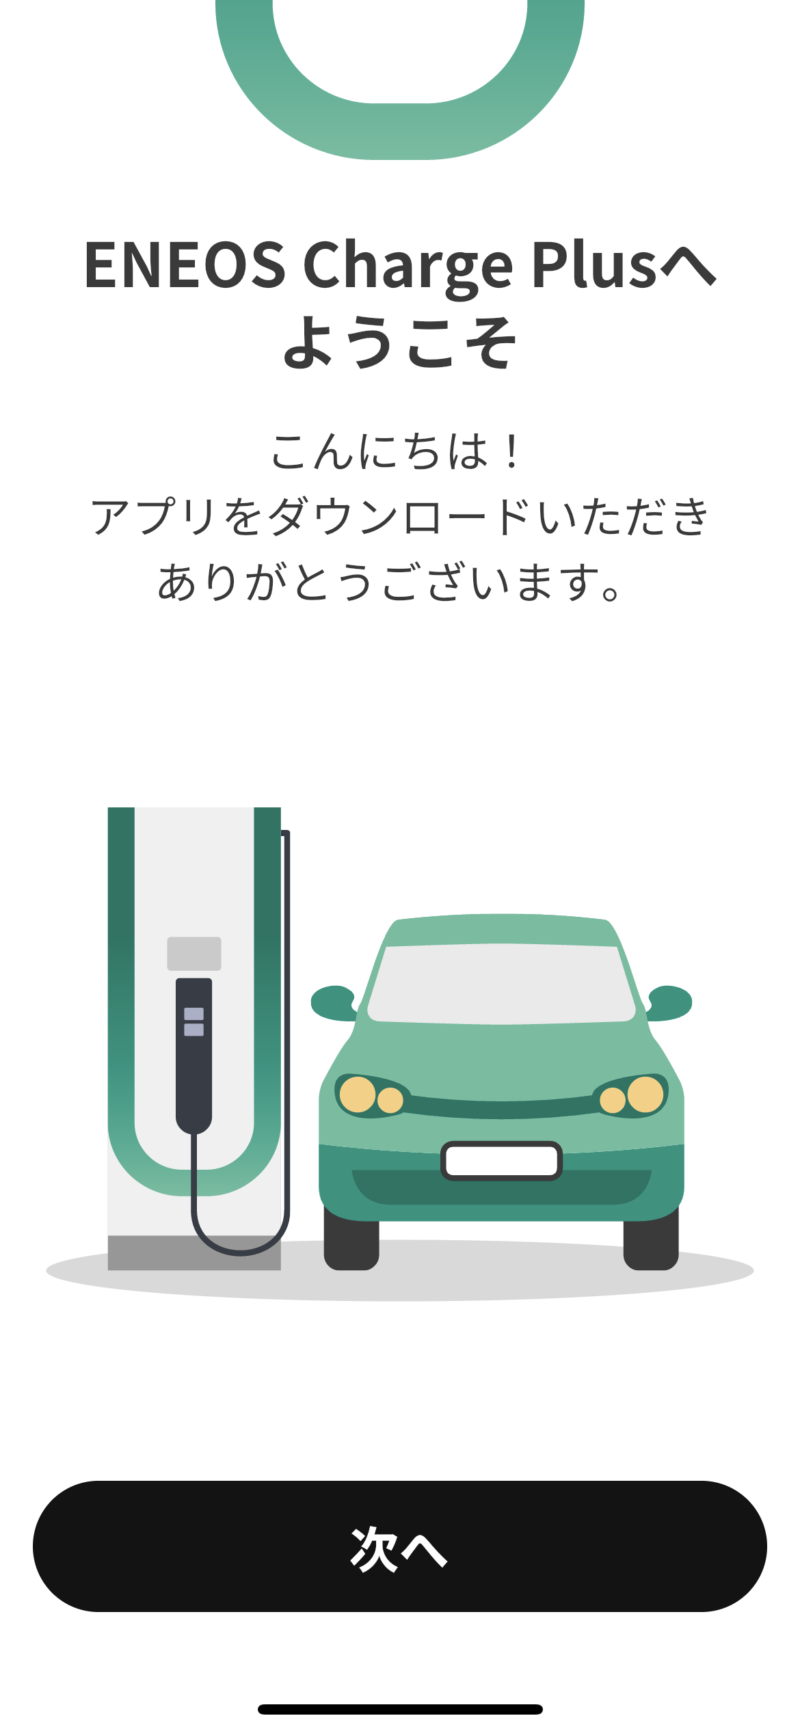 ENEOS Charge Plus 初回起動画面